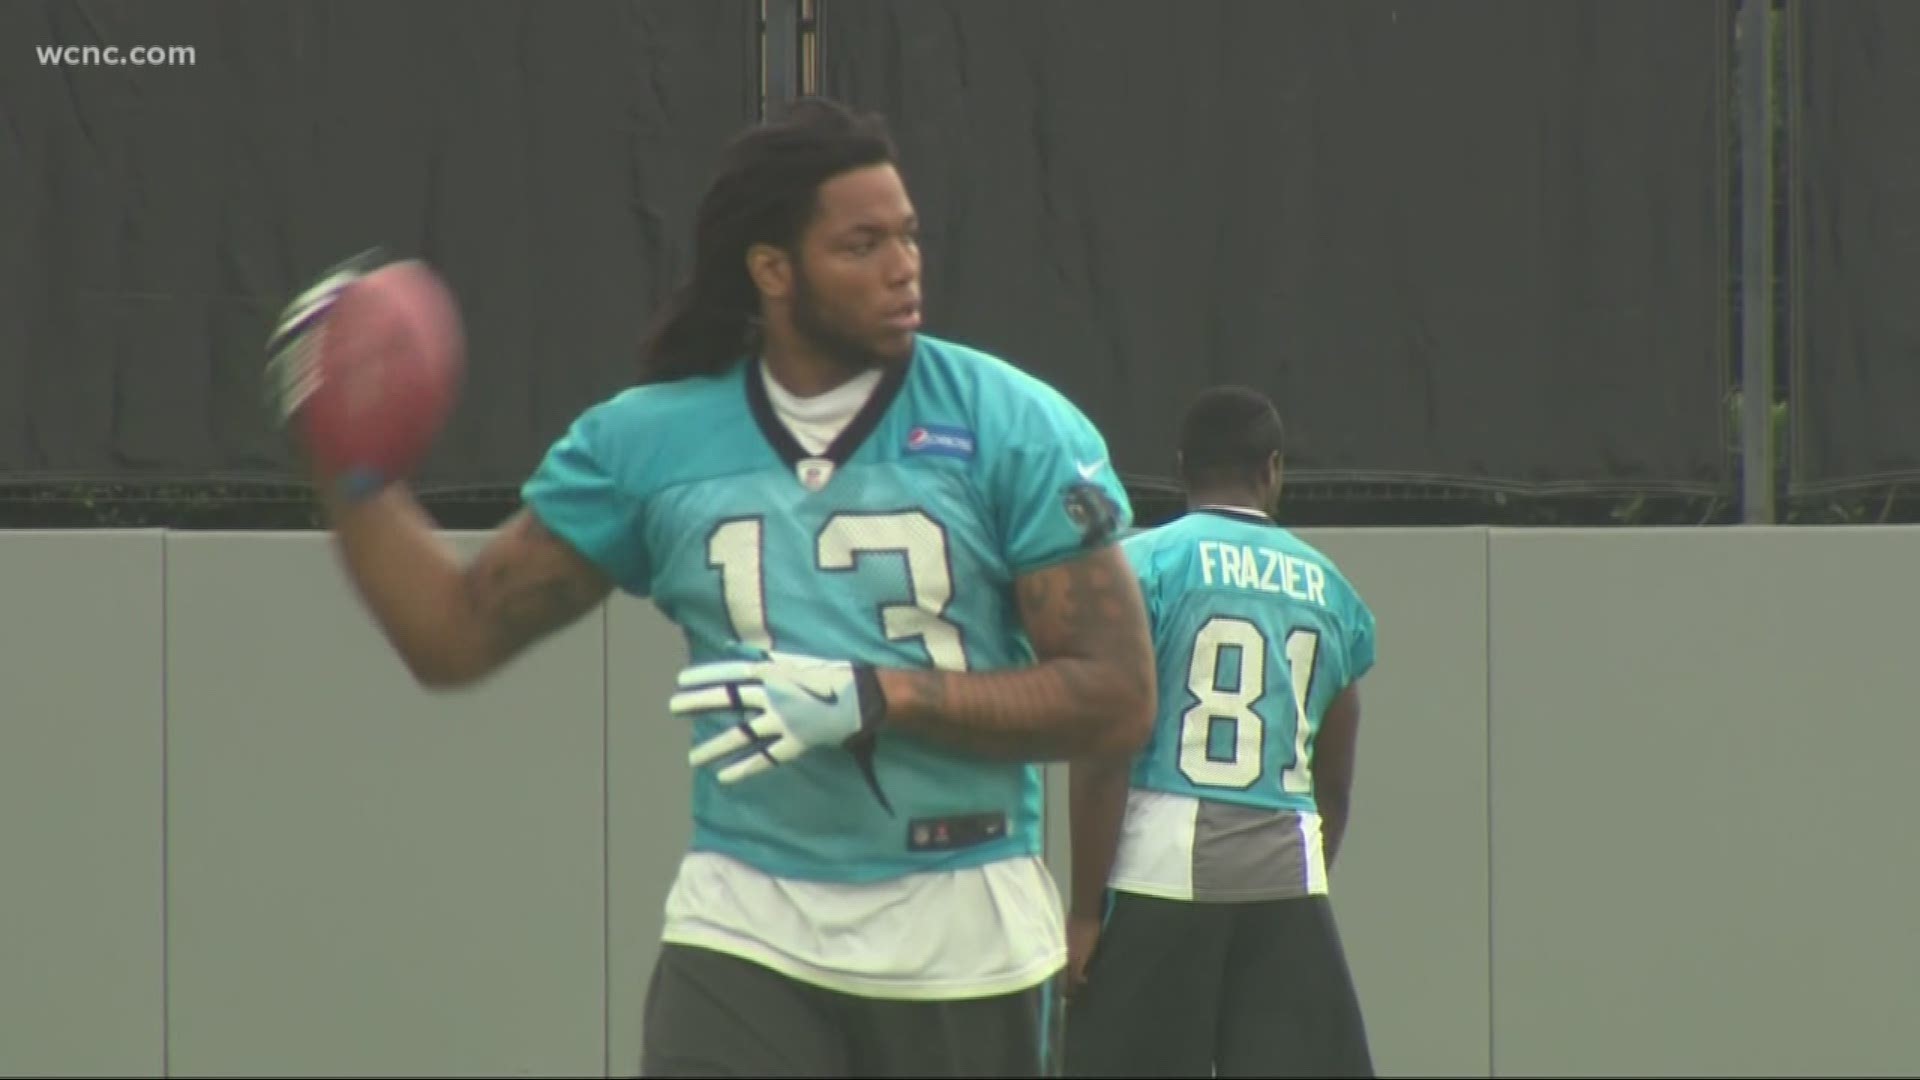 The Panthers take to the field for the first time in 2018 Thursday night, taking on former teammate Kelvin Benjamin and the Buffalo Bills.